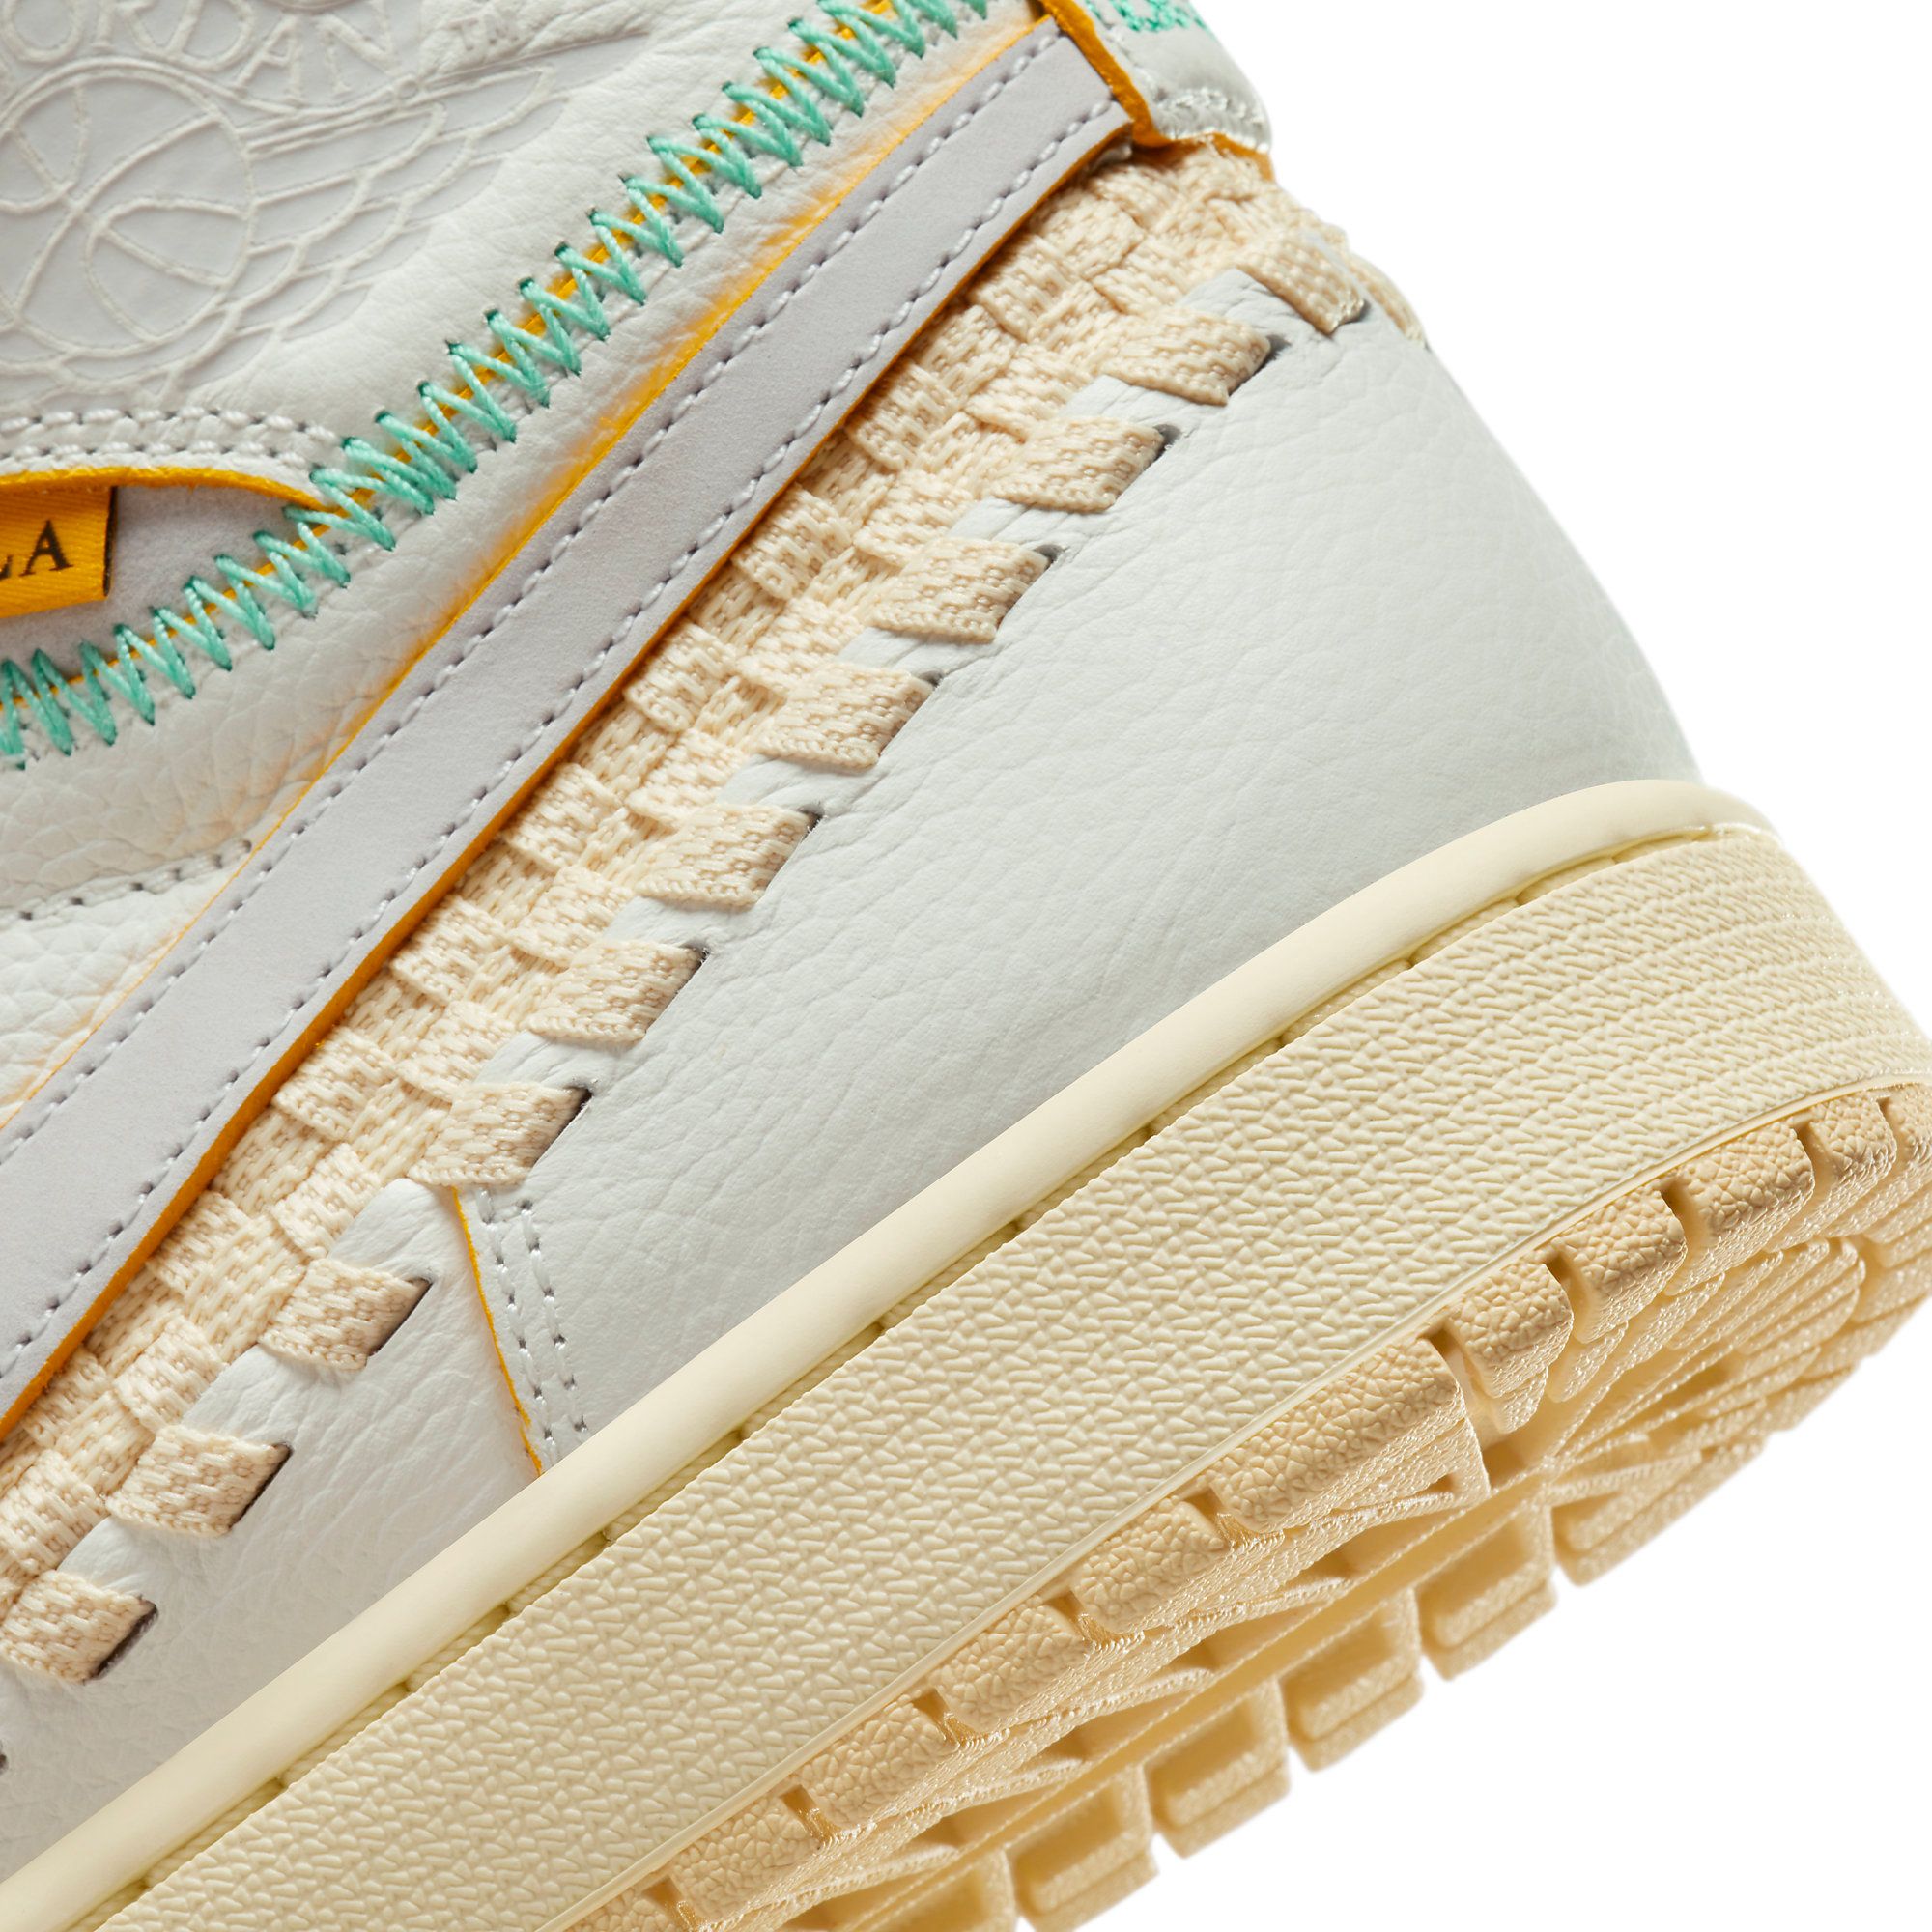 The Union x Bephie's Beauty Supply x Air Jordan 1 "Summer of '